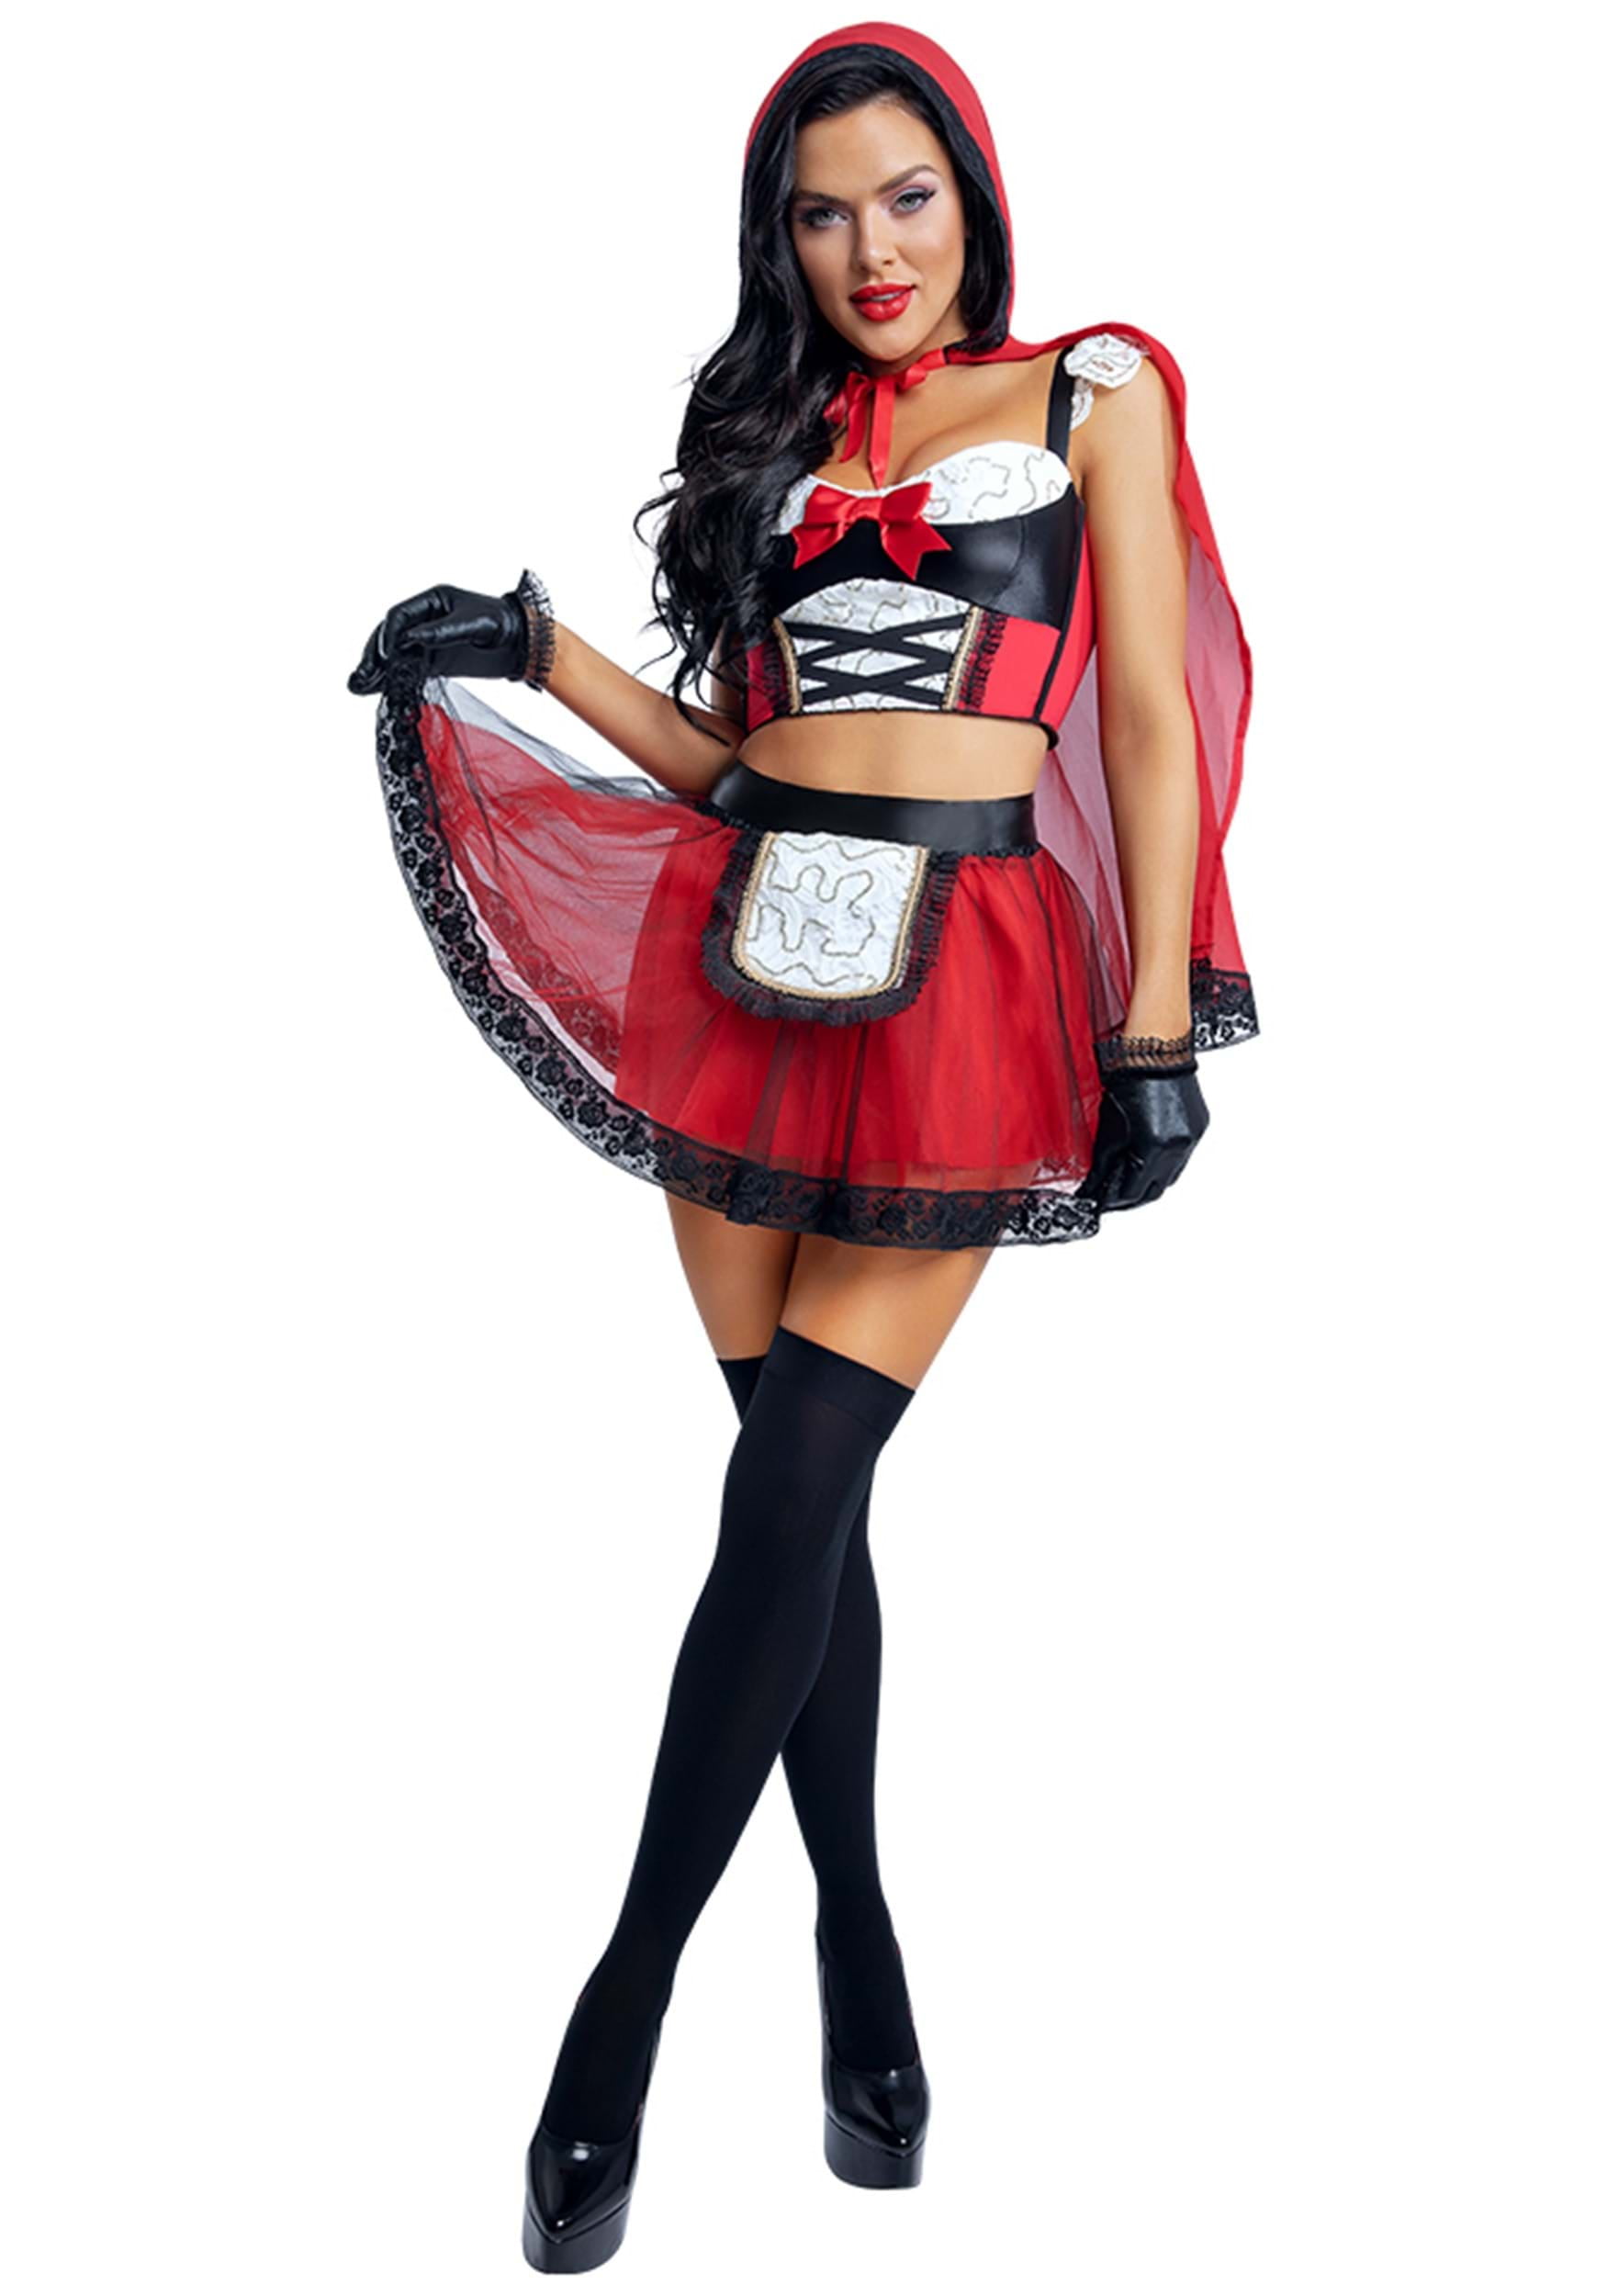 On a large scale Dazzling small Women's Little Red Riding Hood Costume - Walmart.com